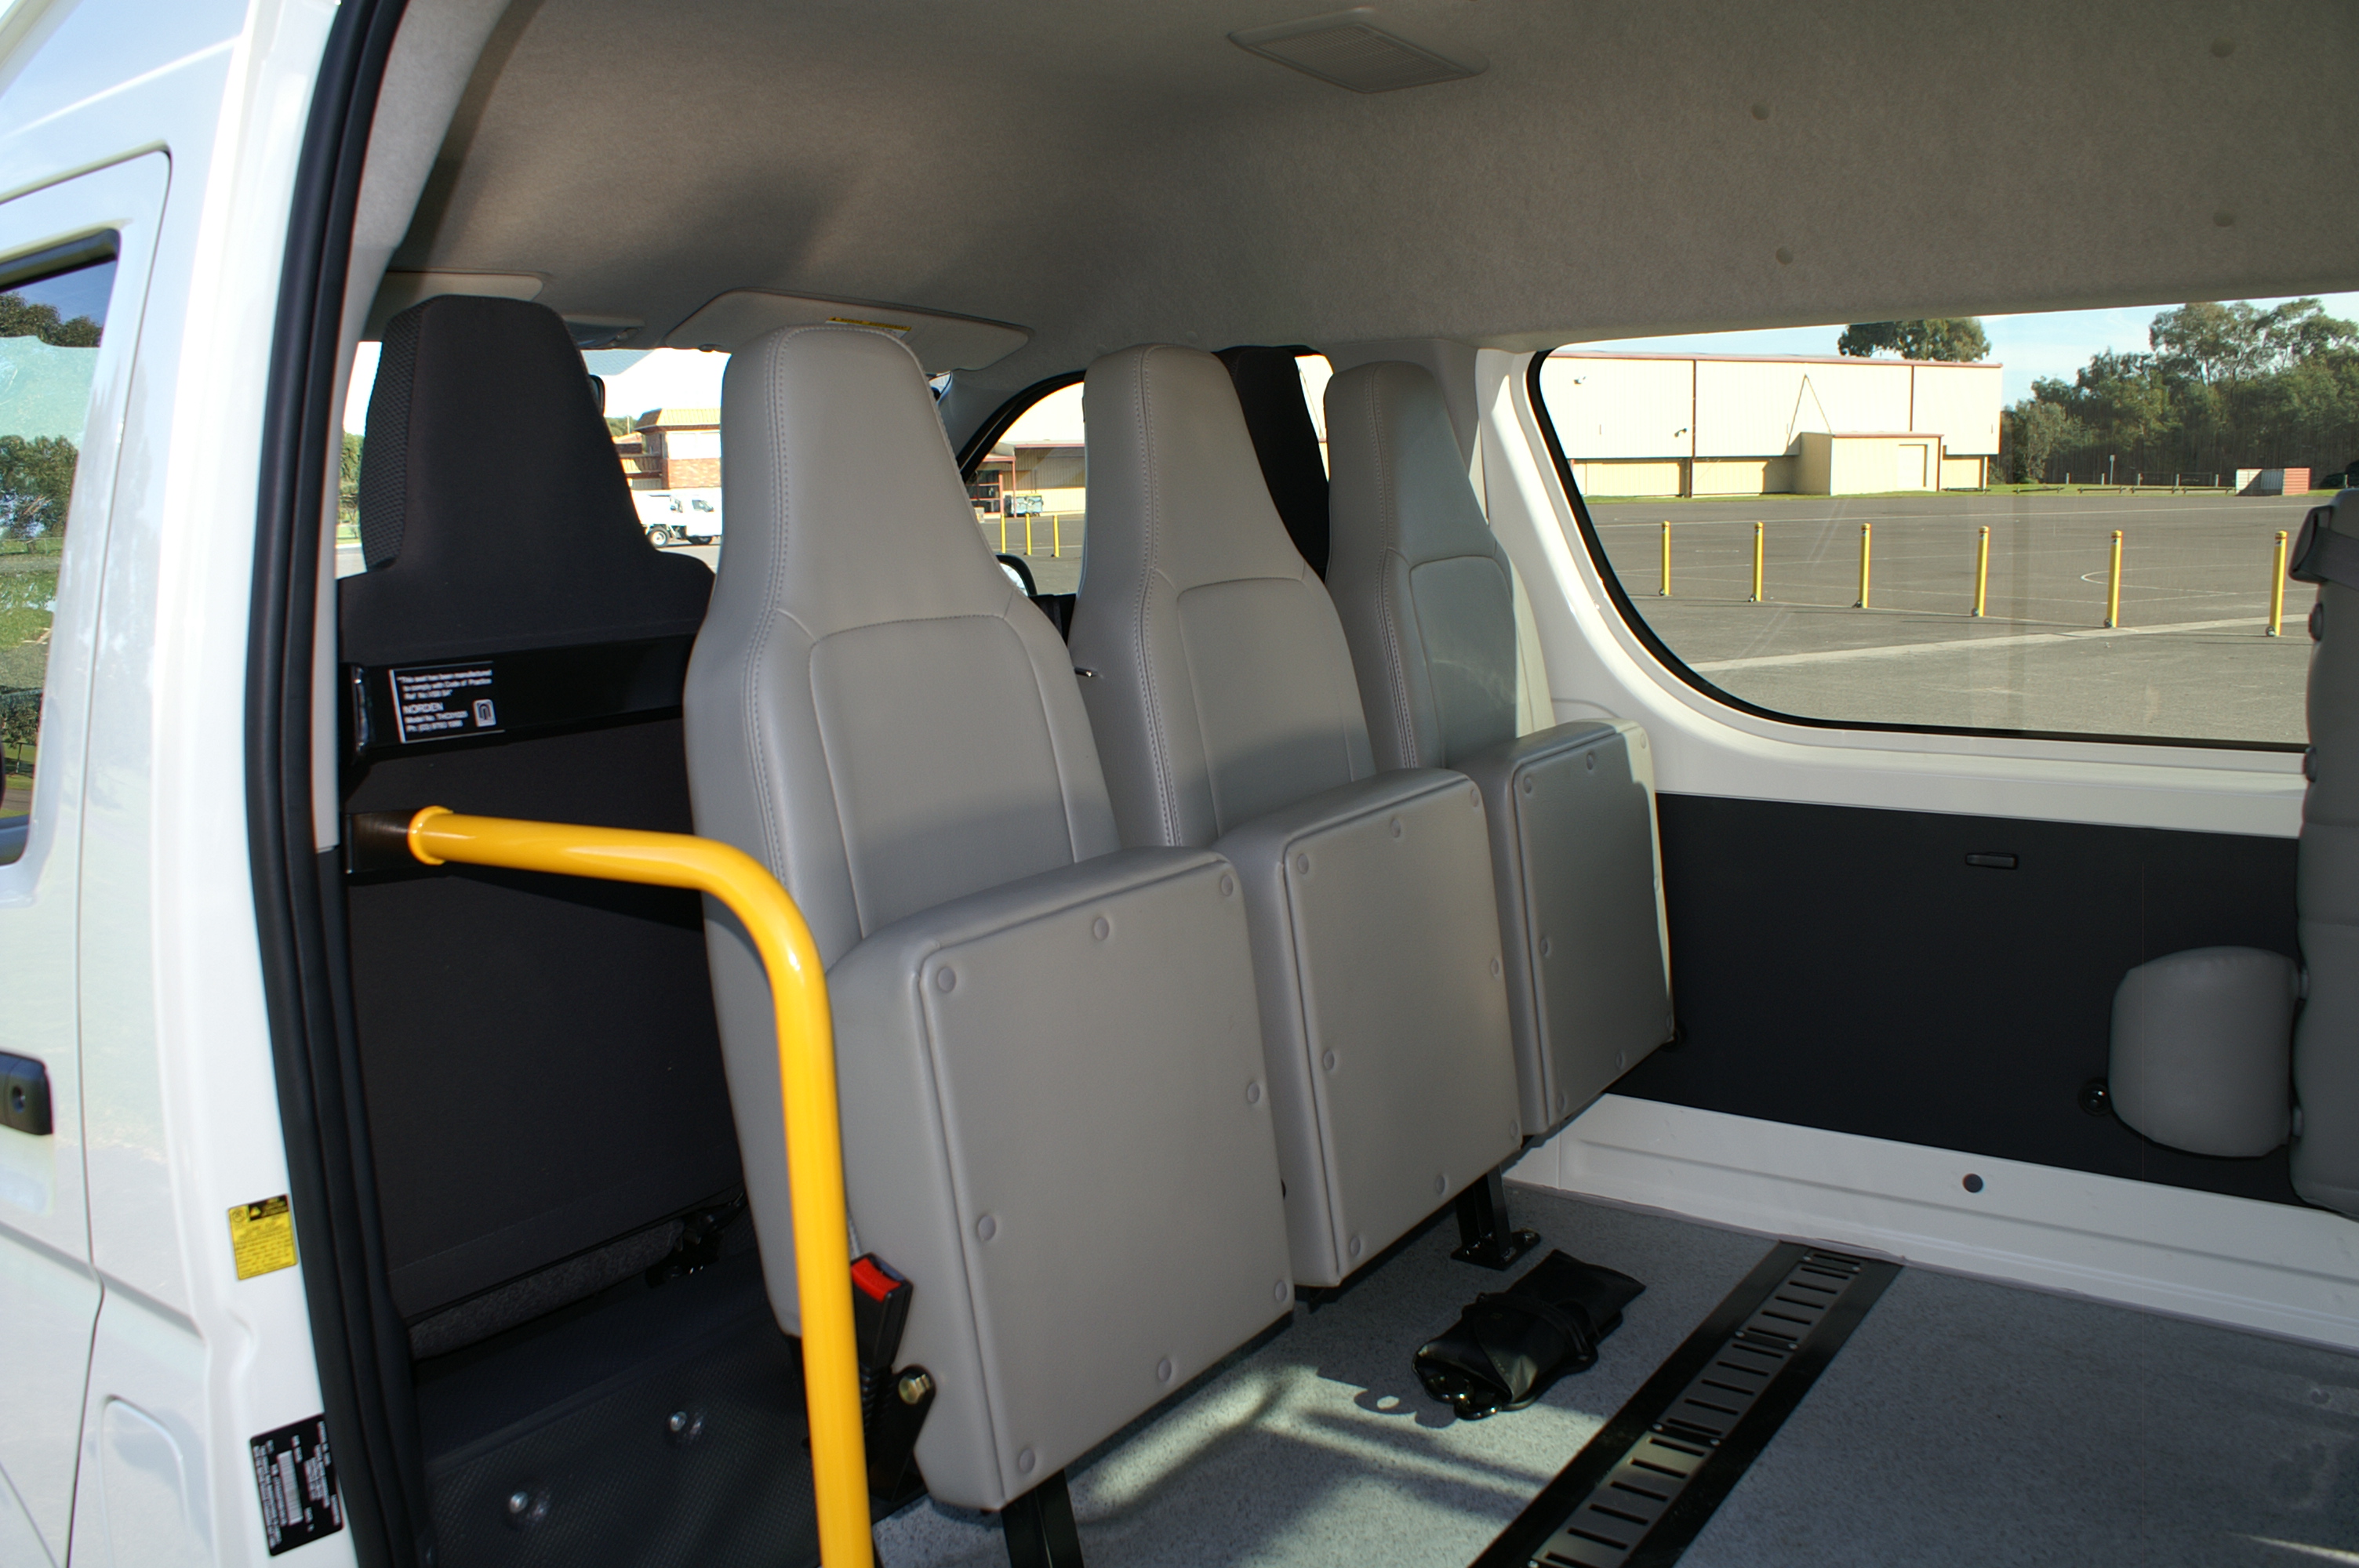 Vehicle Access Solutions: Flexible seating options